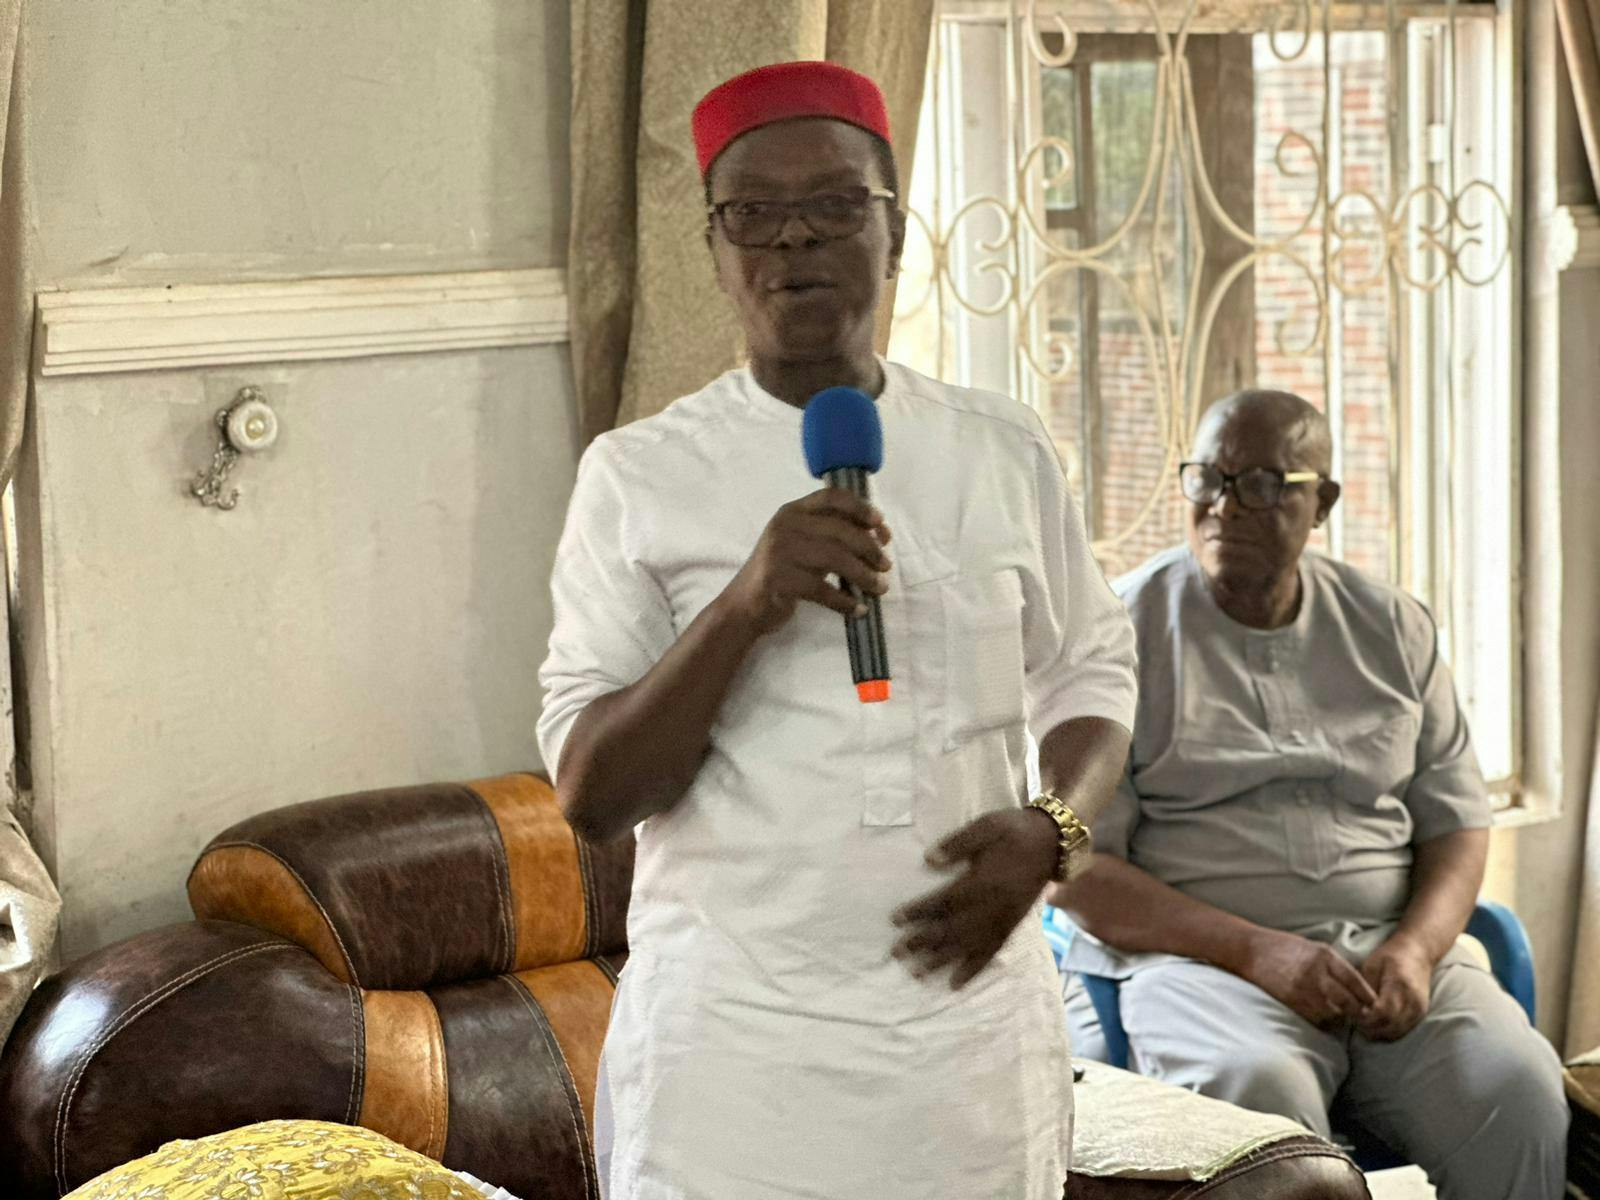 Ndubueze assures Obowo of Uncommon representation when elected.